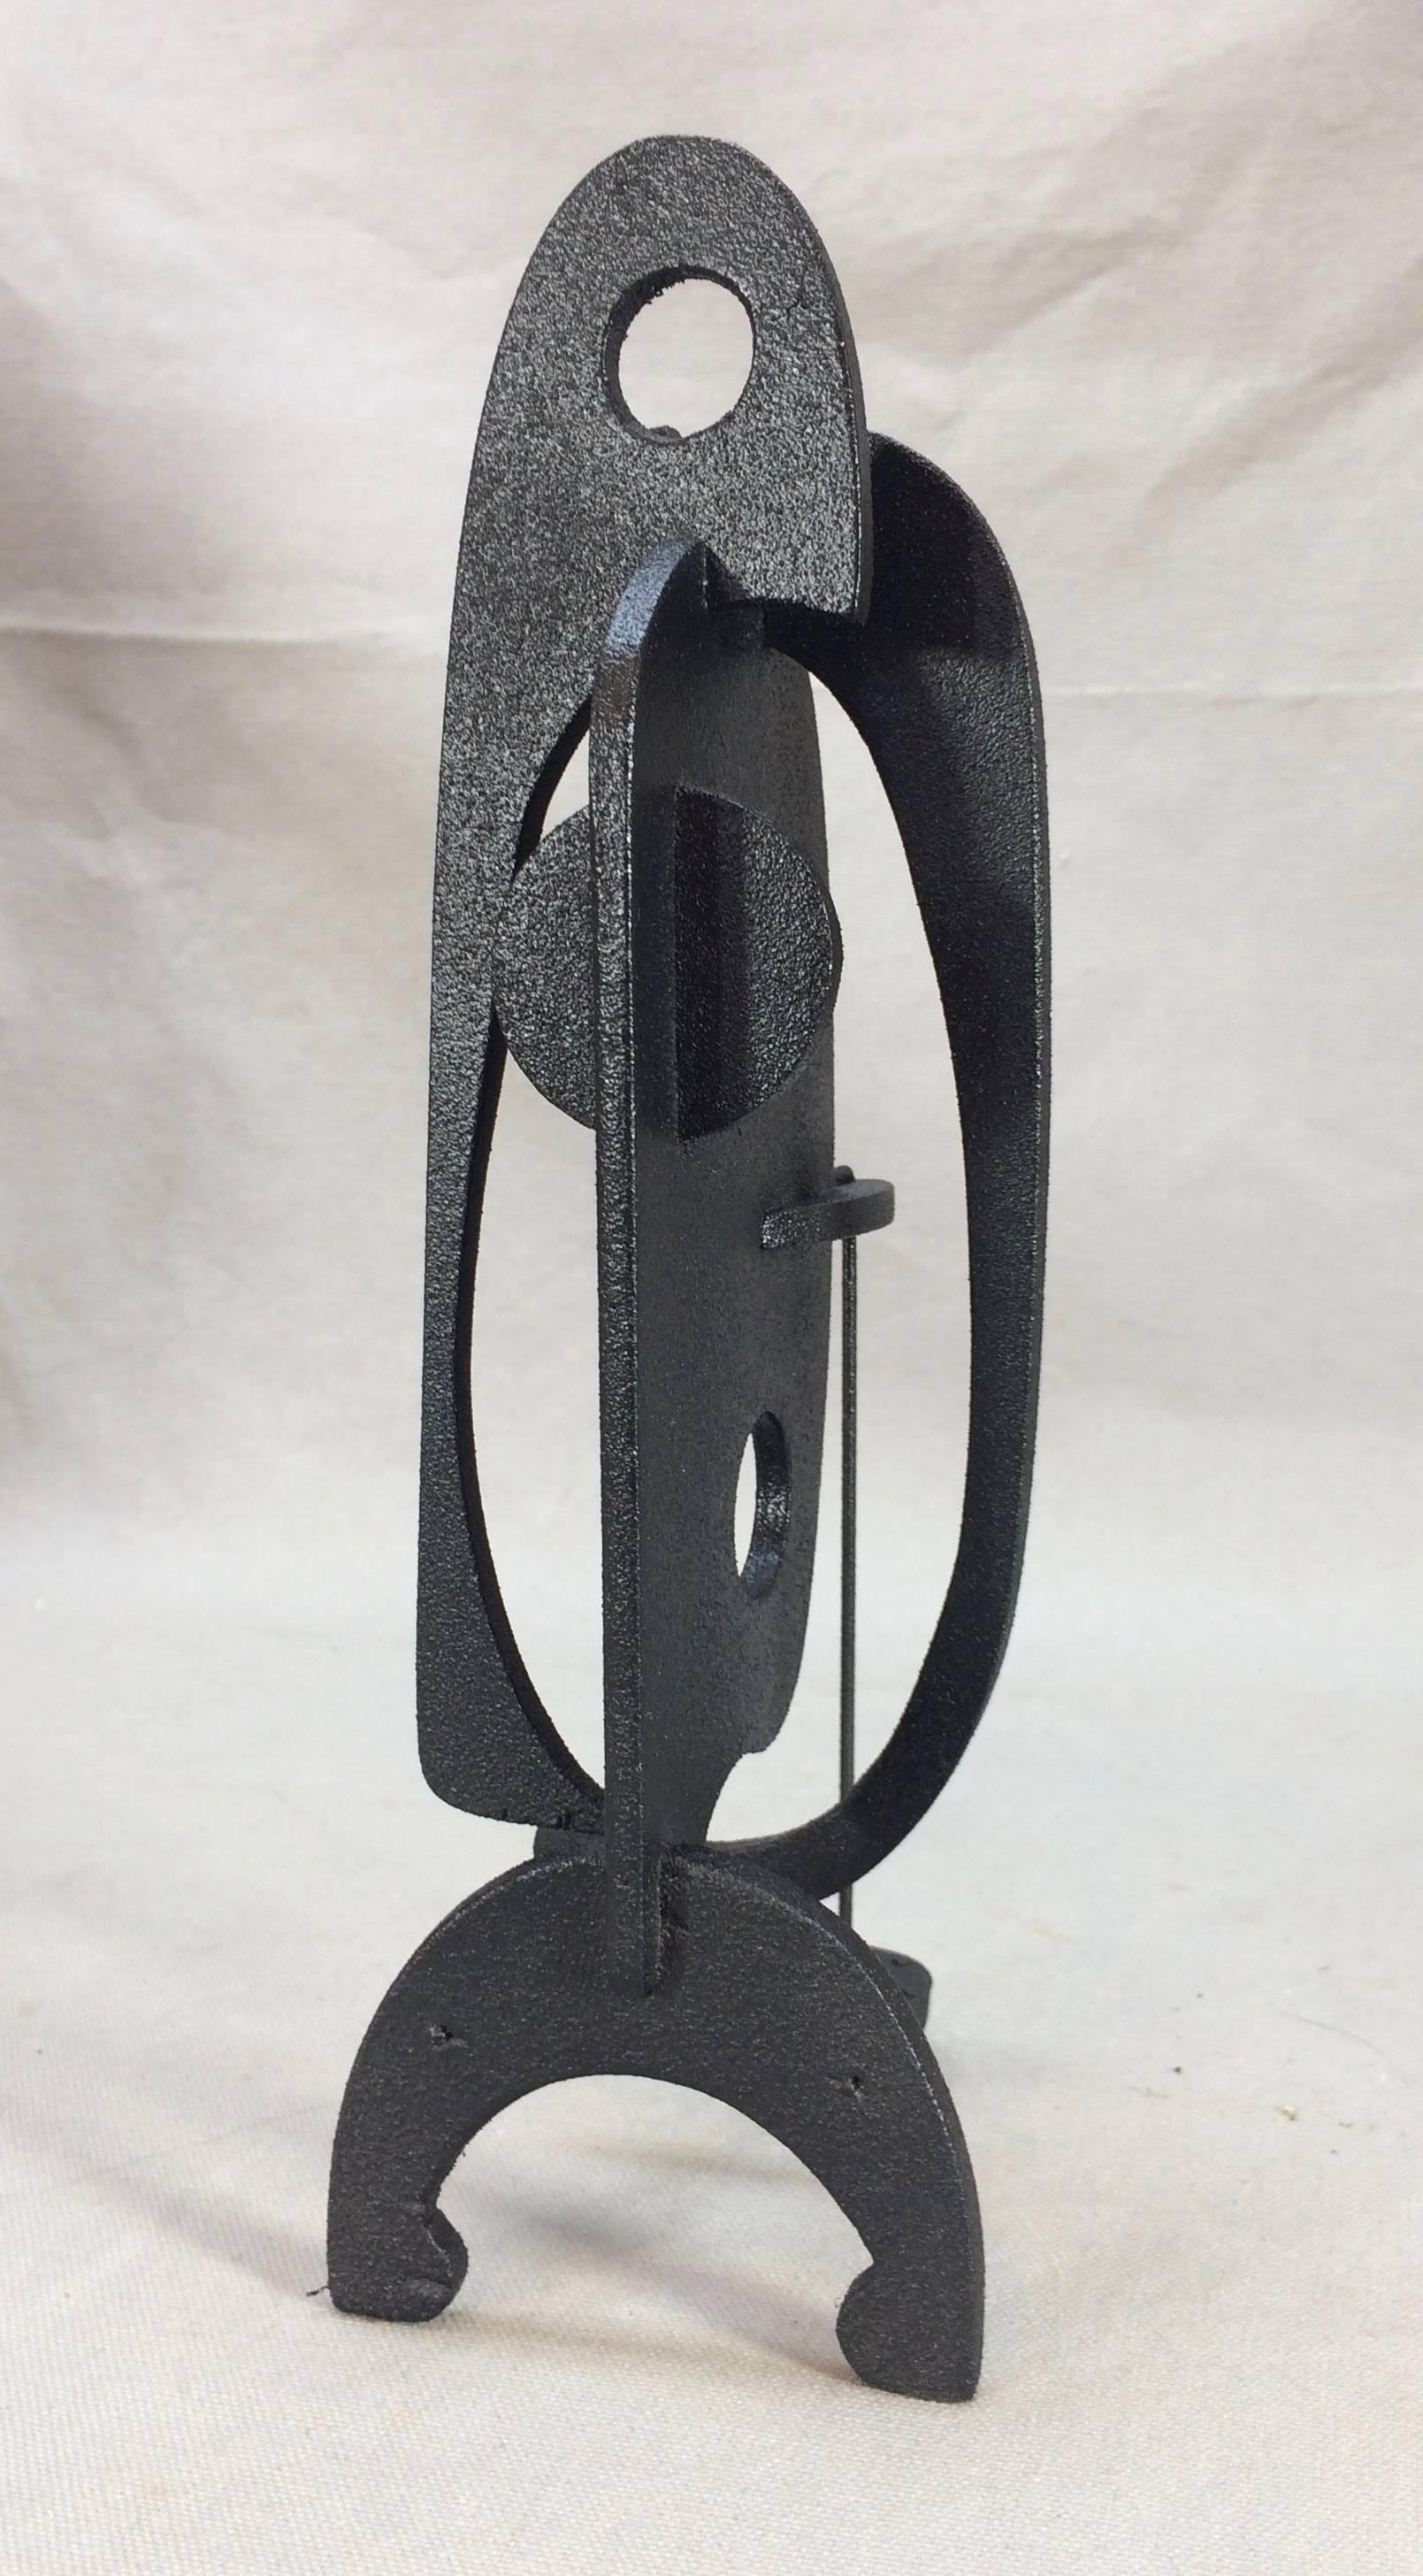 Burnished Black Seed Abstract Sculpture by Adam Henderson